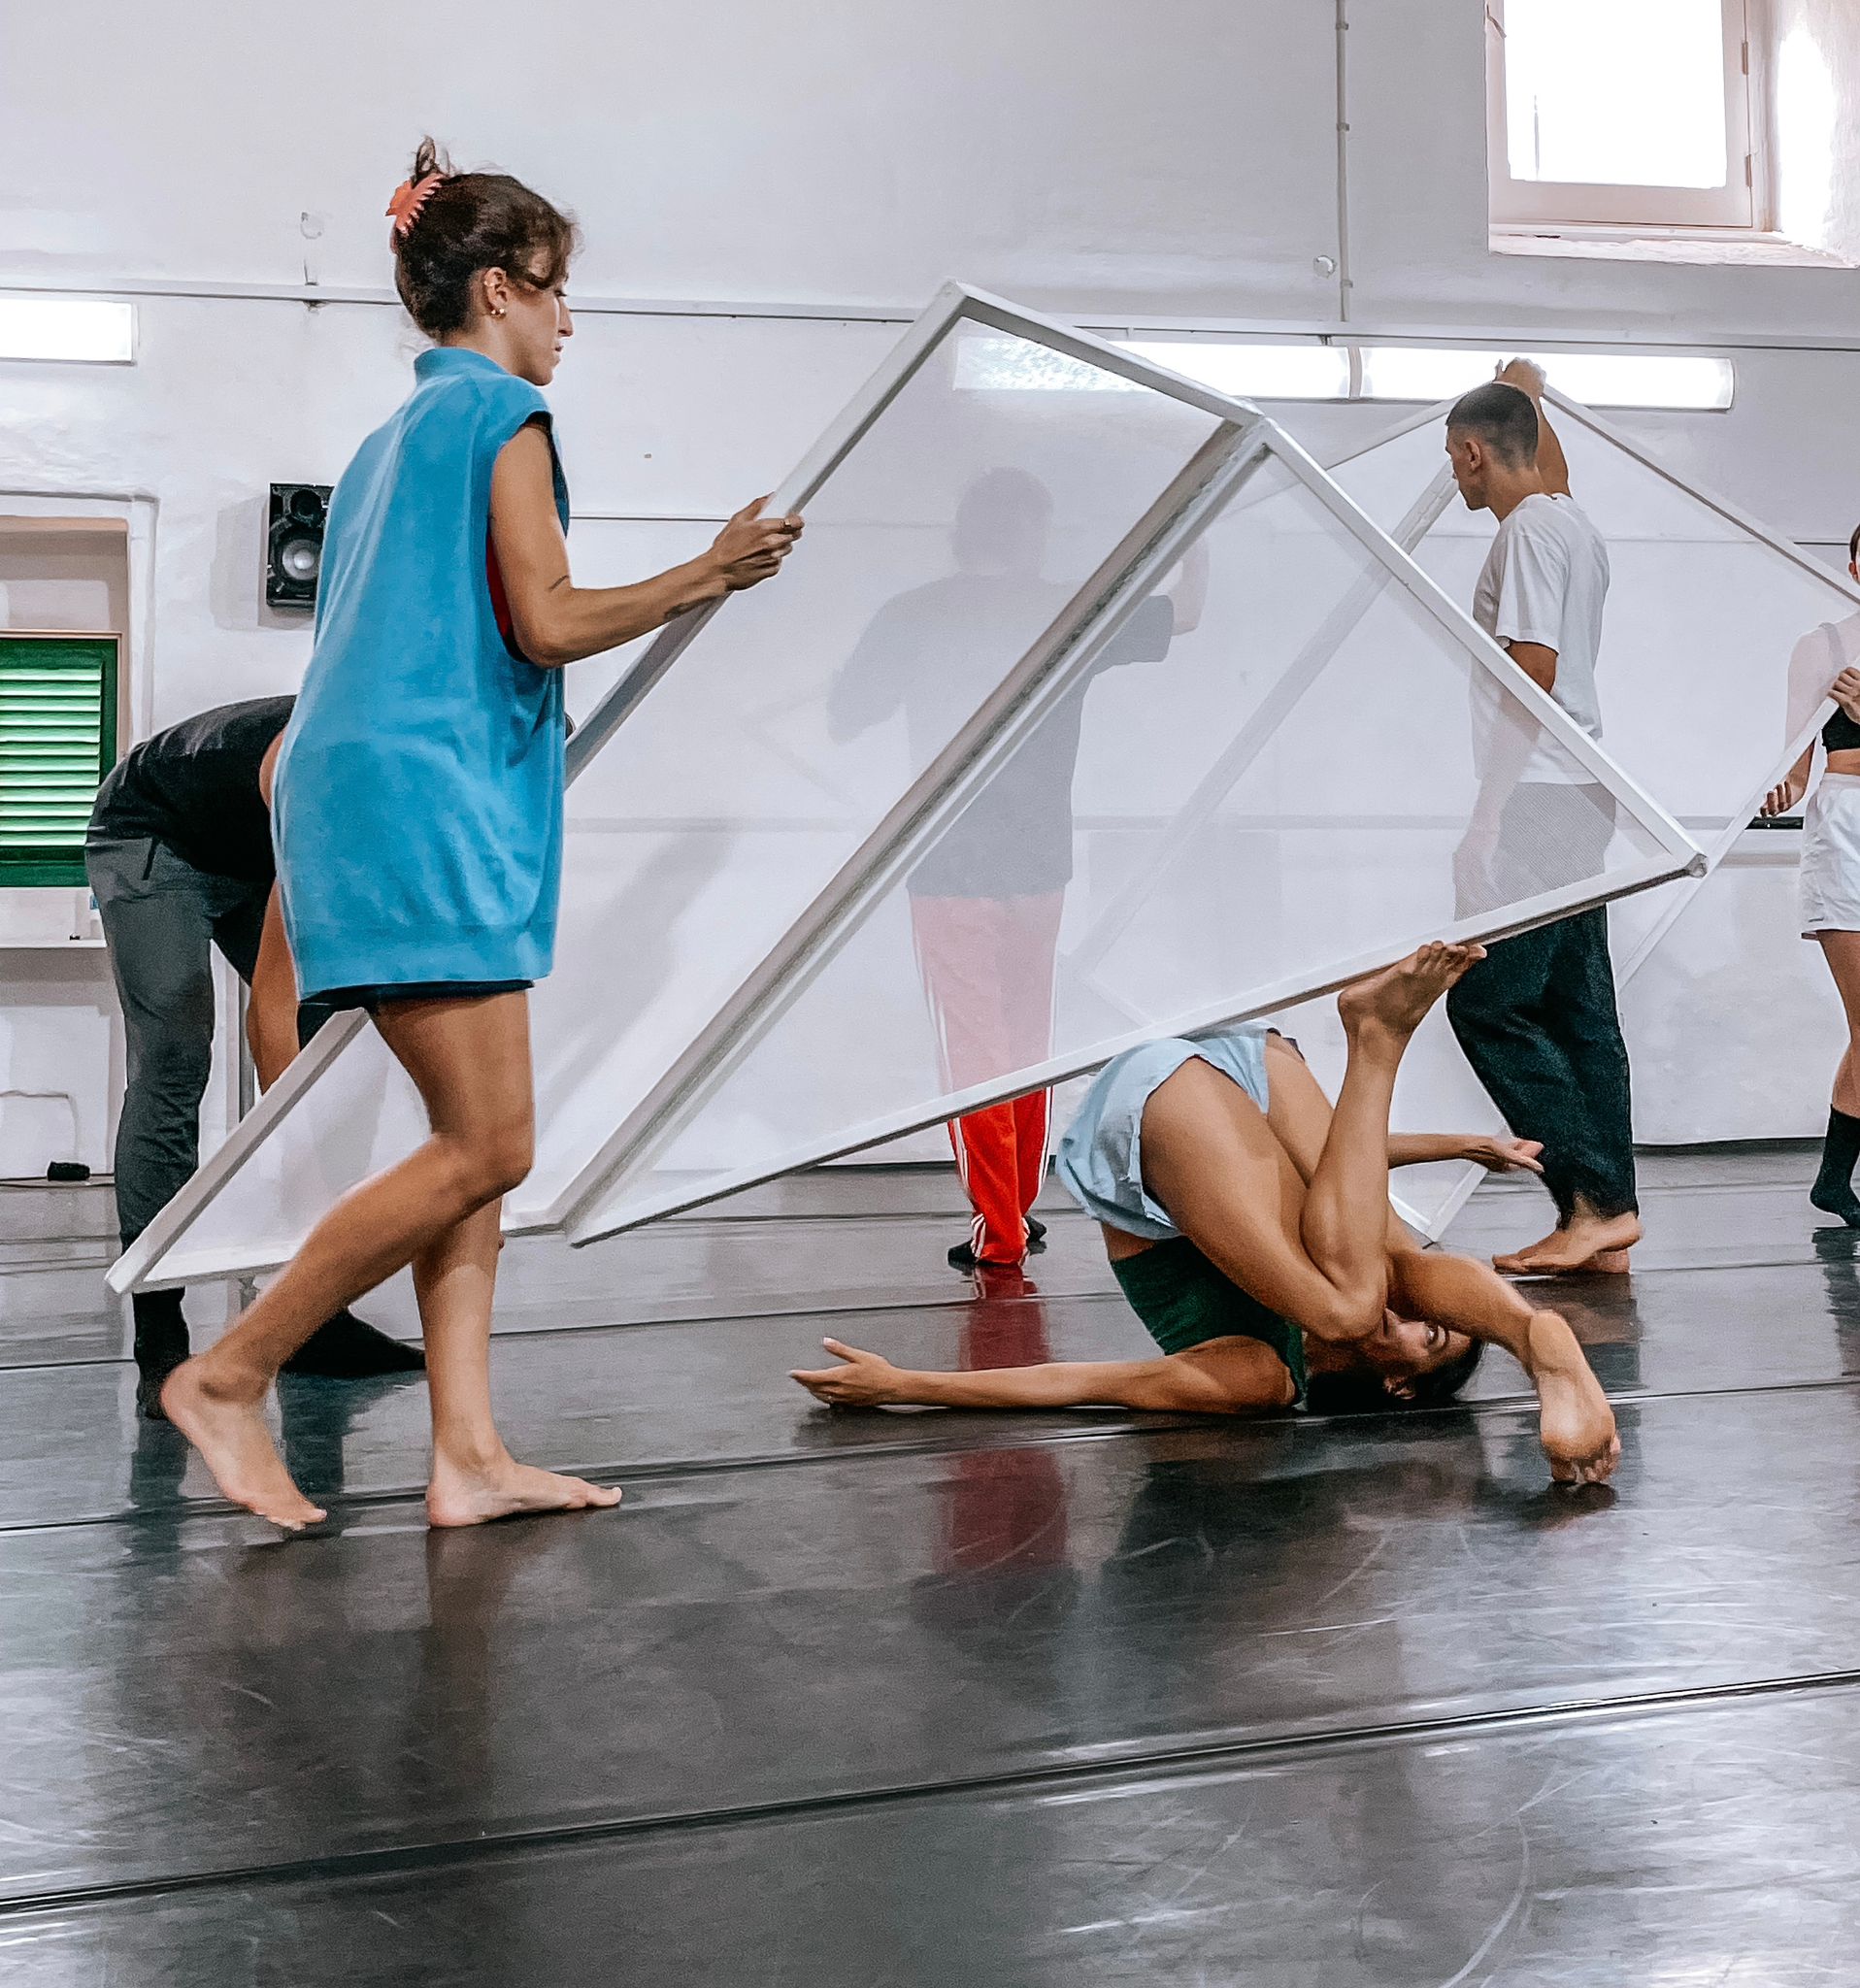 ŻfinMalta's On Reefs and Eroded Lands We Danced in Open Rehearsal photo by Kim Ellul